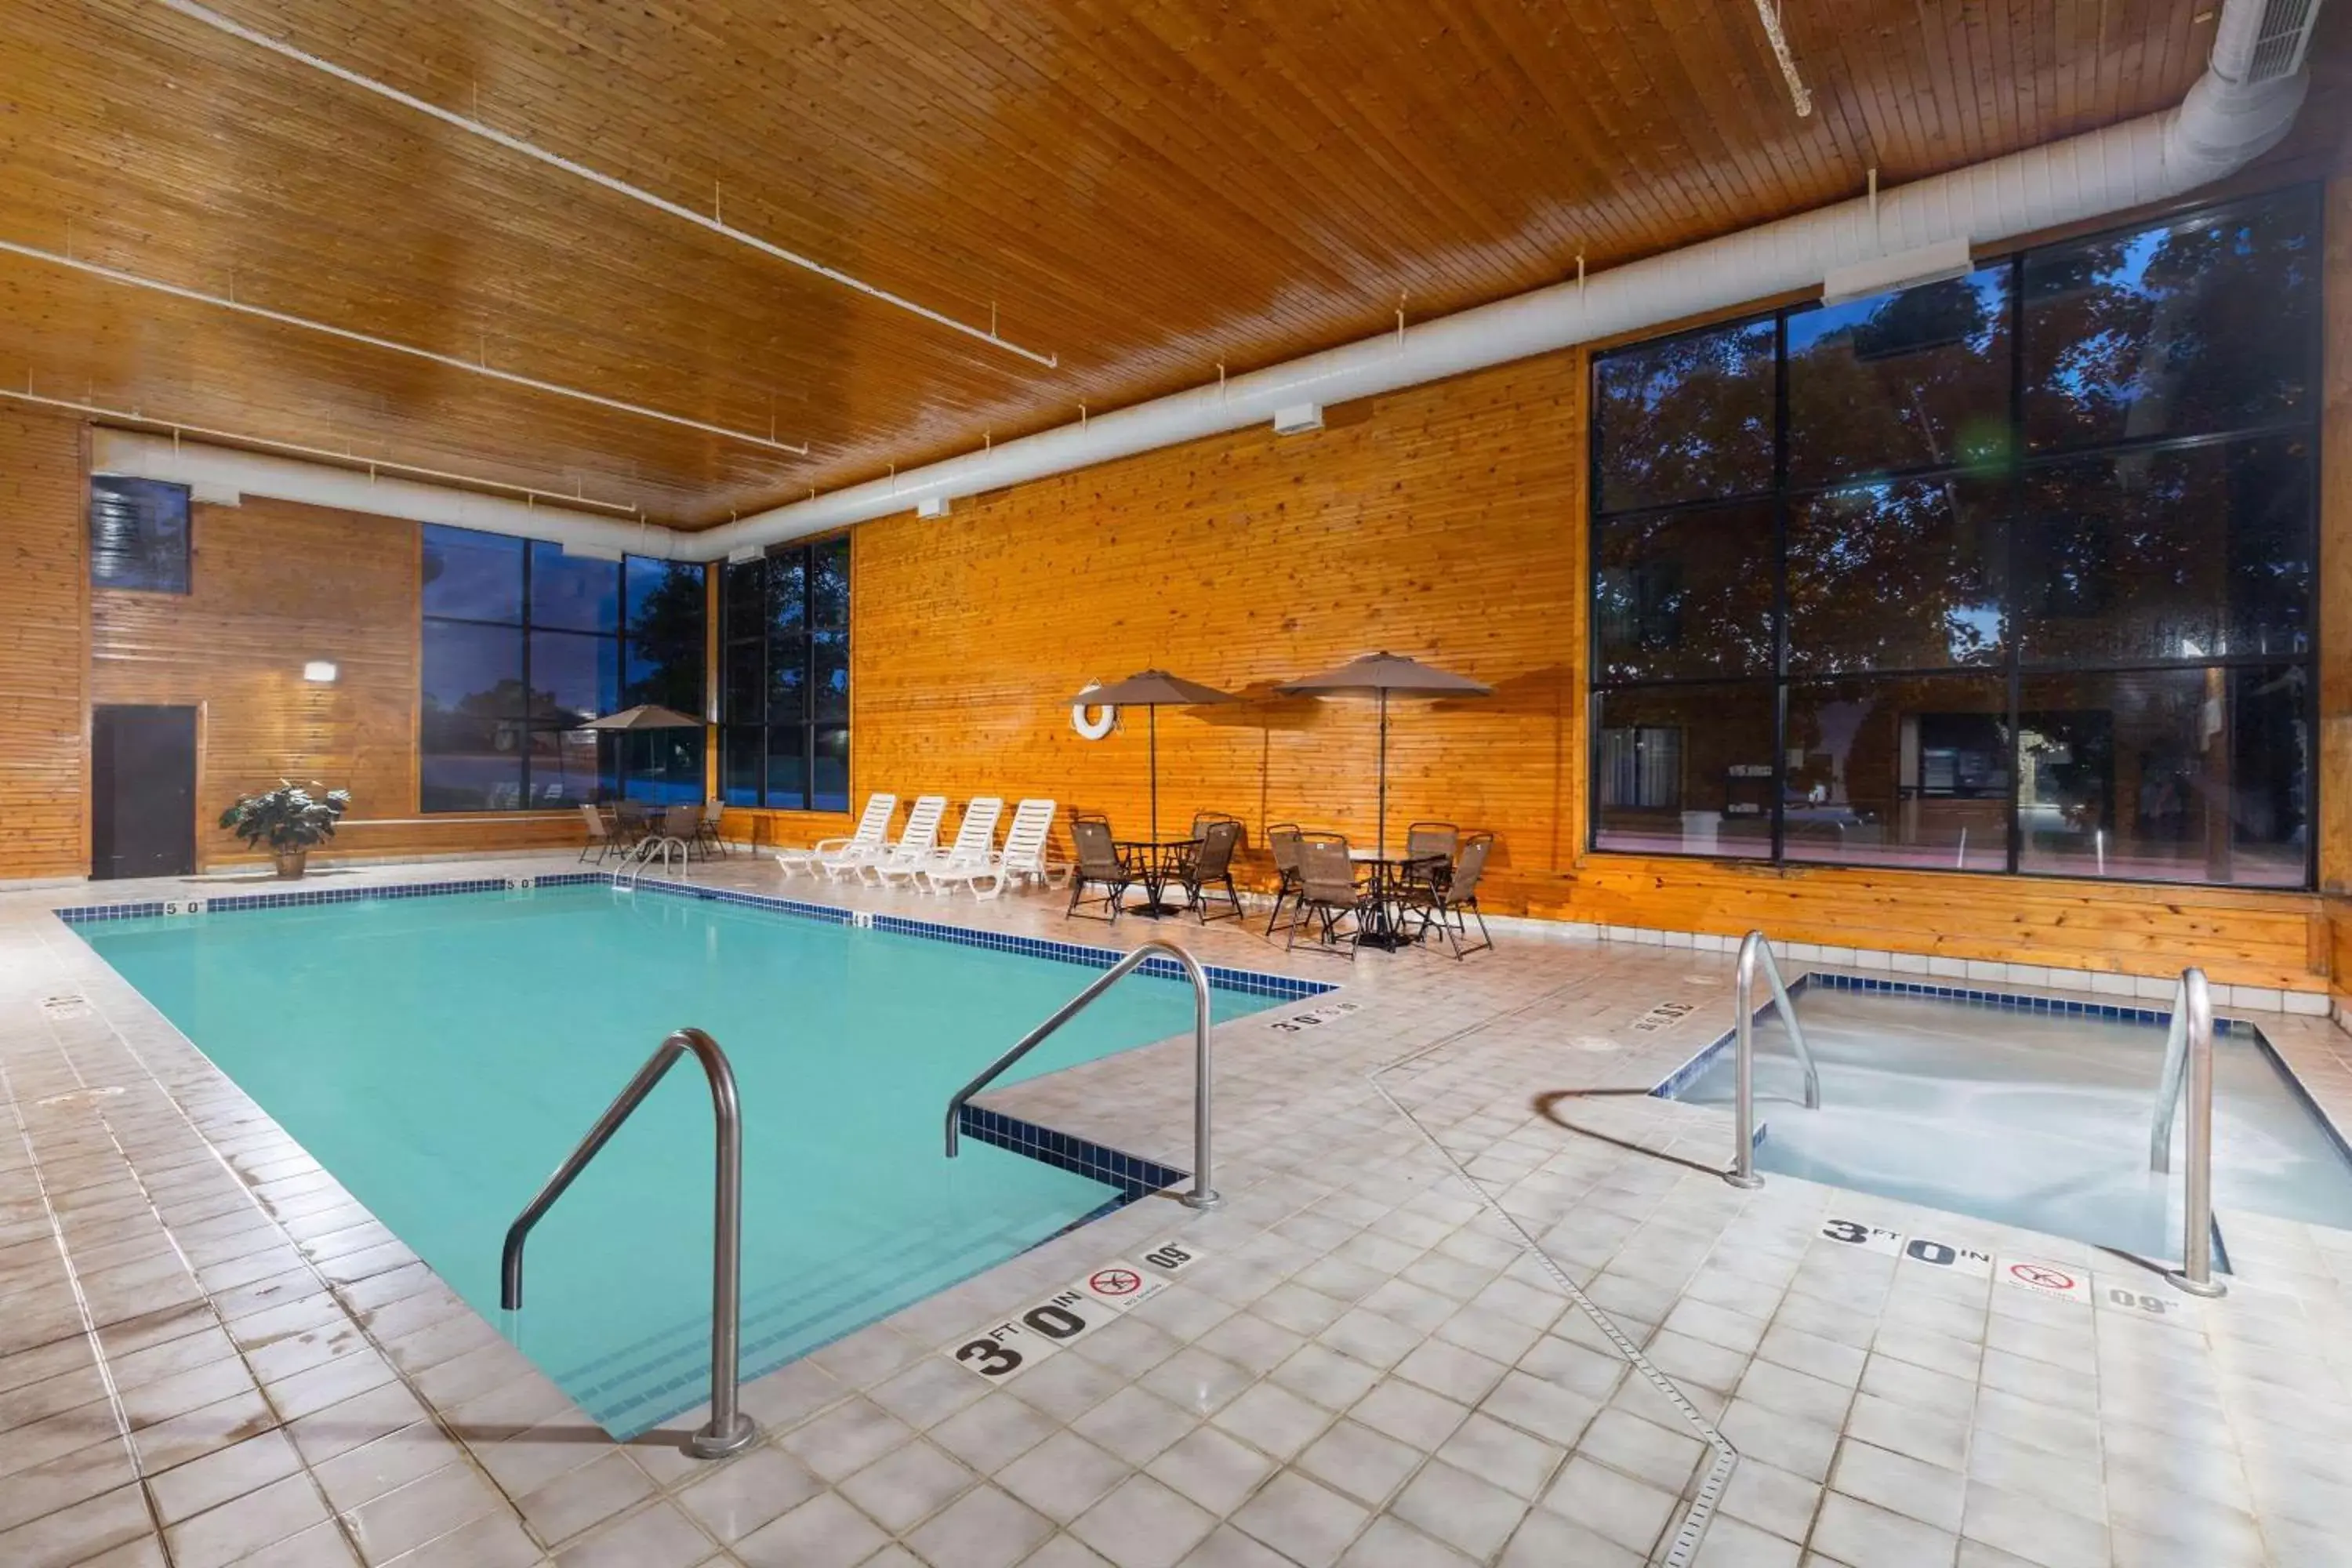 On site, Swimming Pool in Baymont Inn & Suites by Wyndham Mukwonago